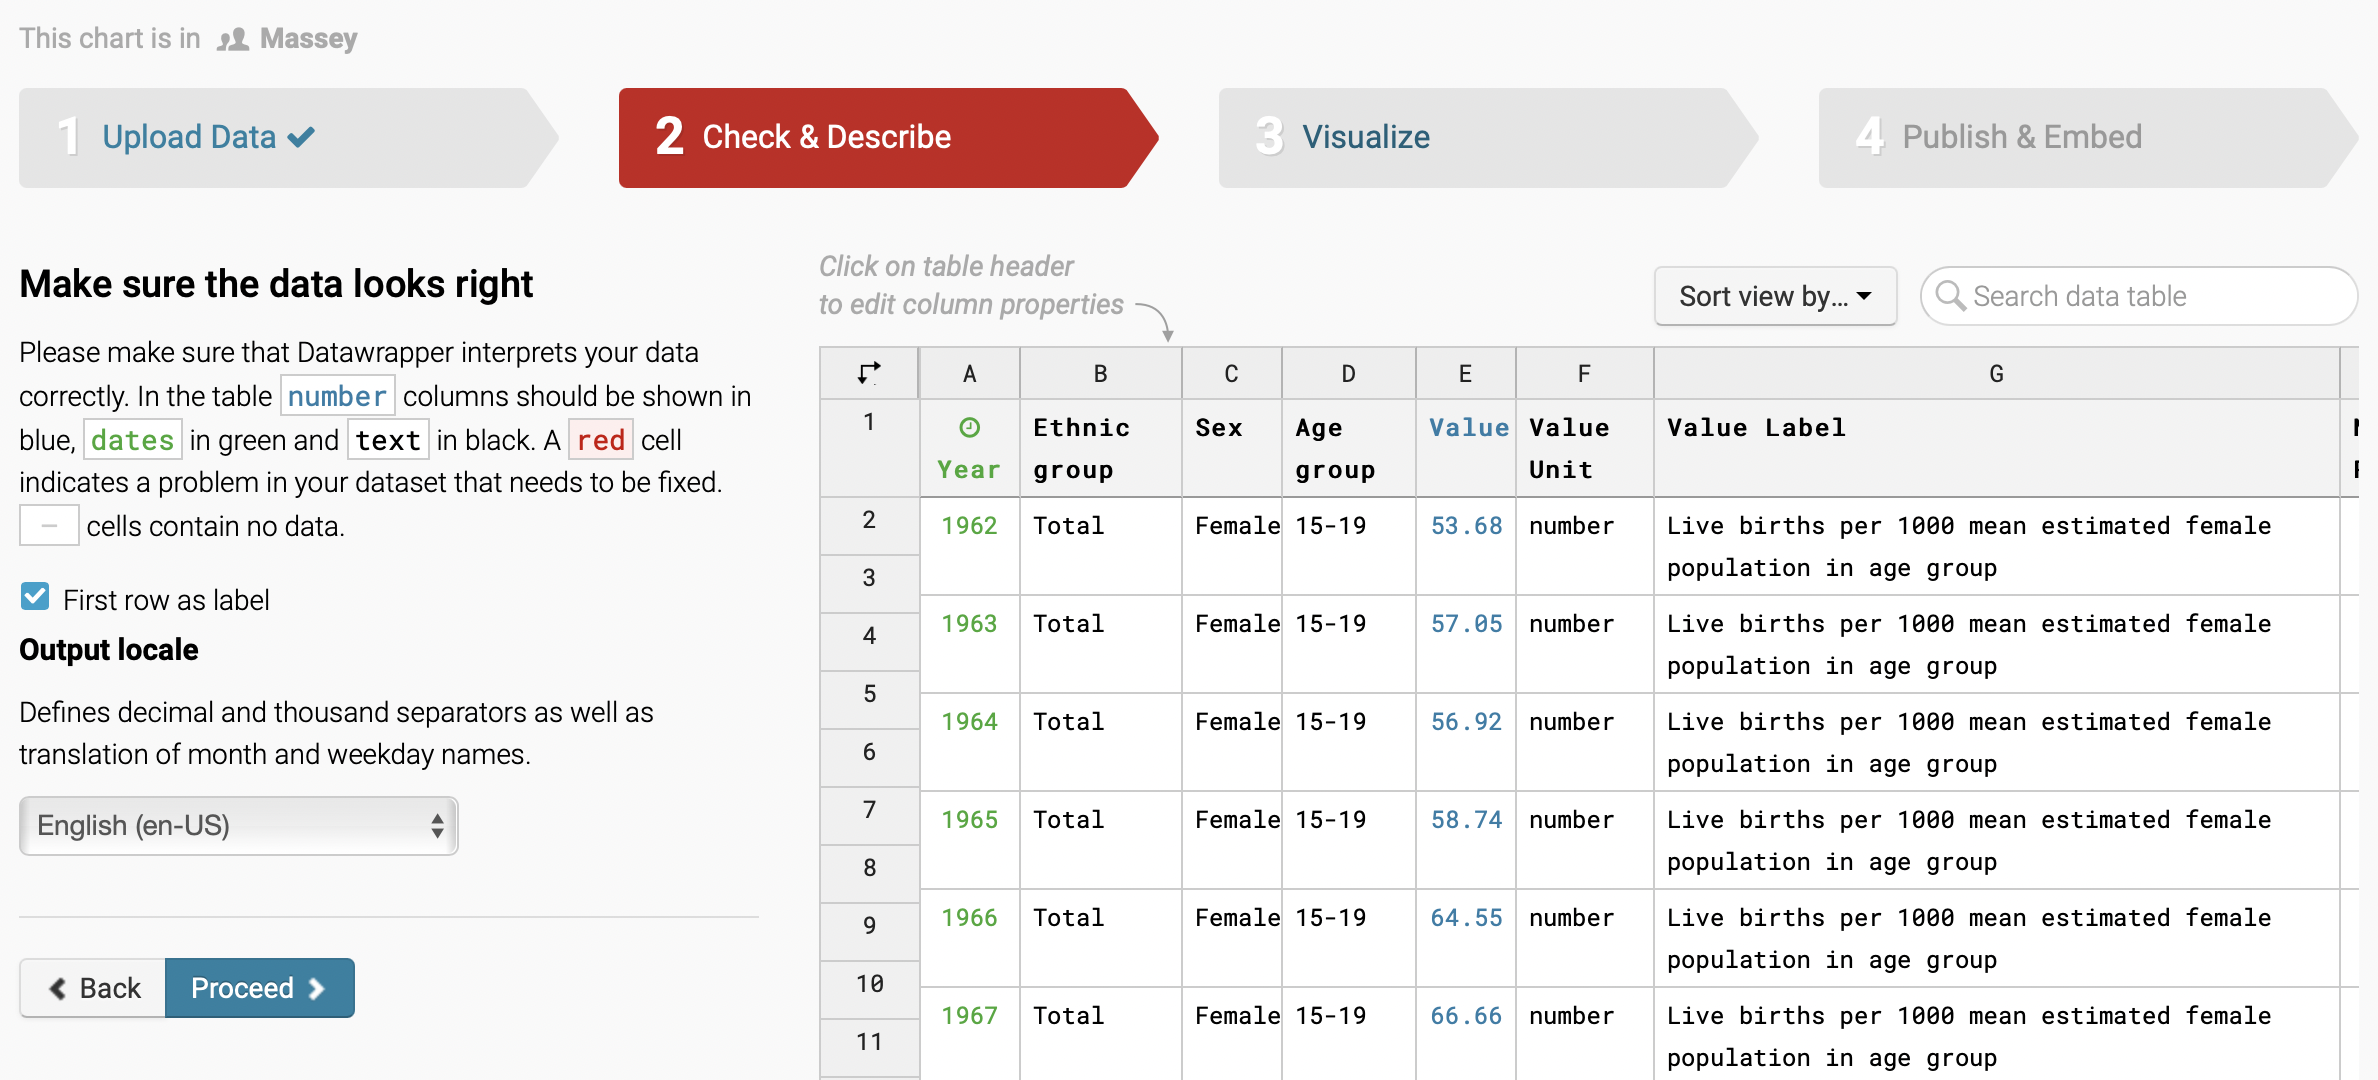 Screenshot of Datawrapper's Check & Describe tab showing the teenage fertility data from Figure.NZ